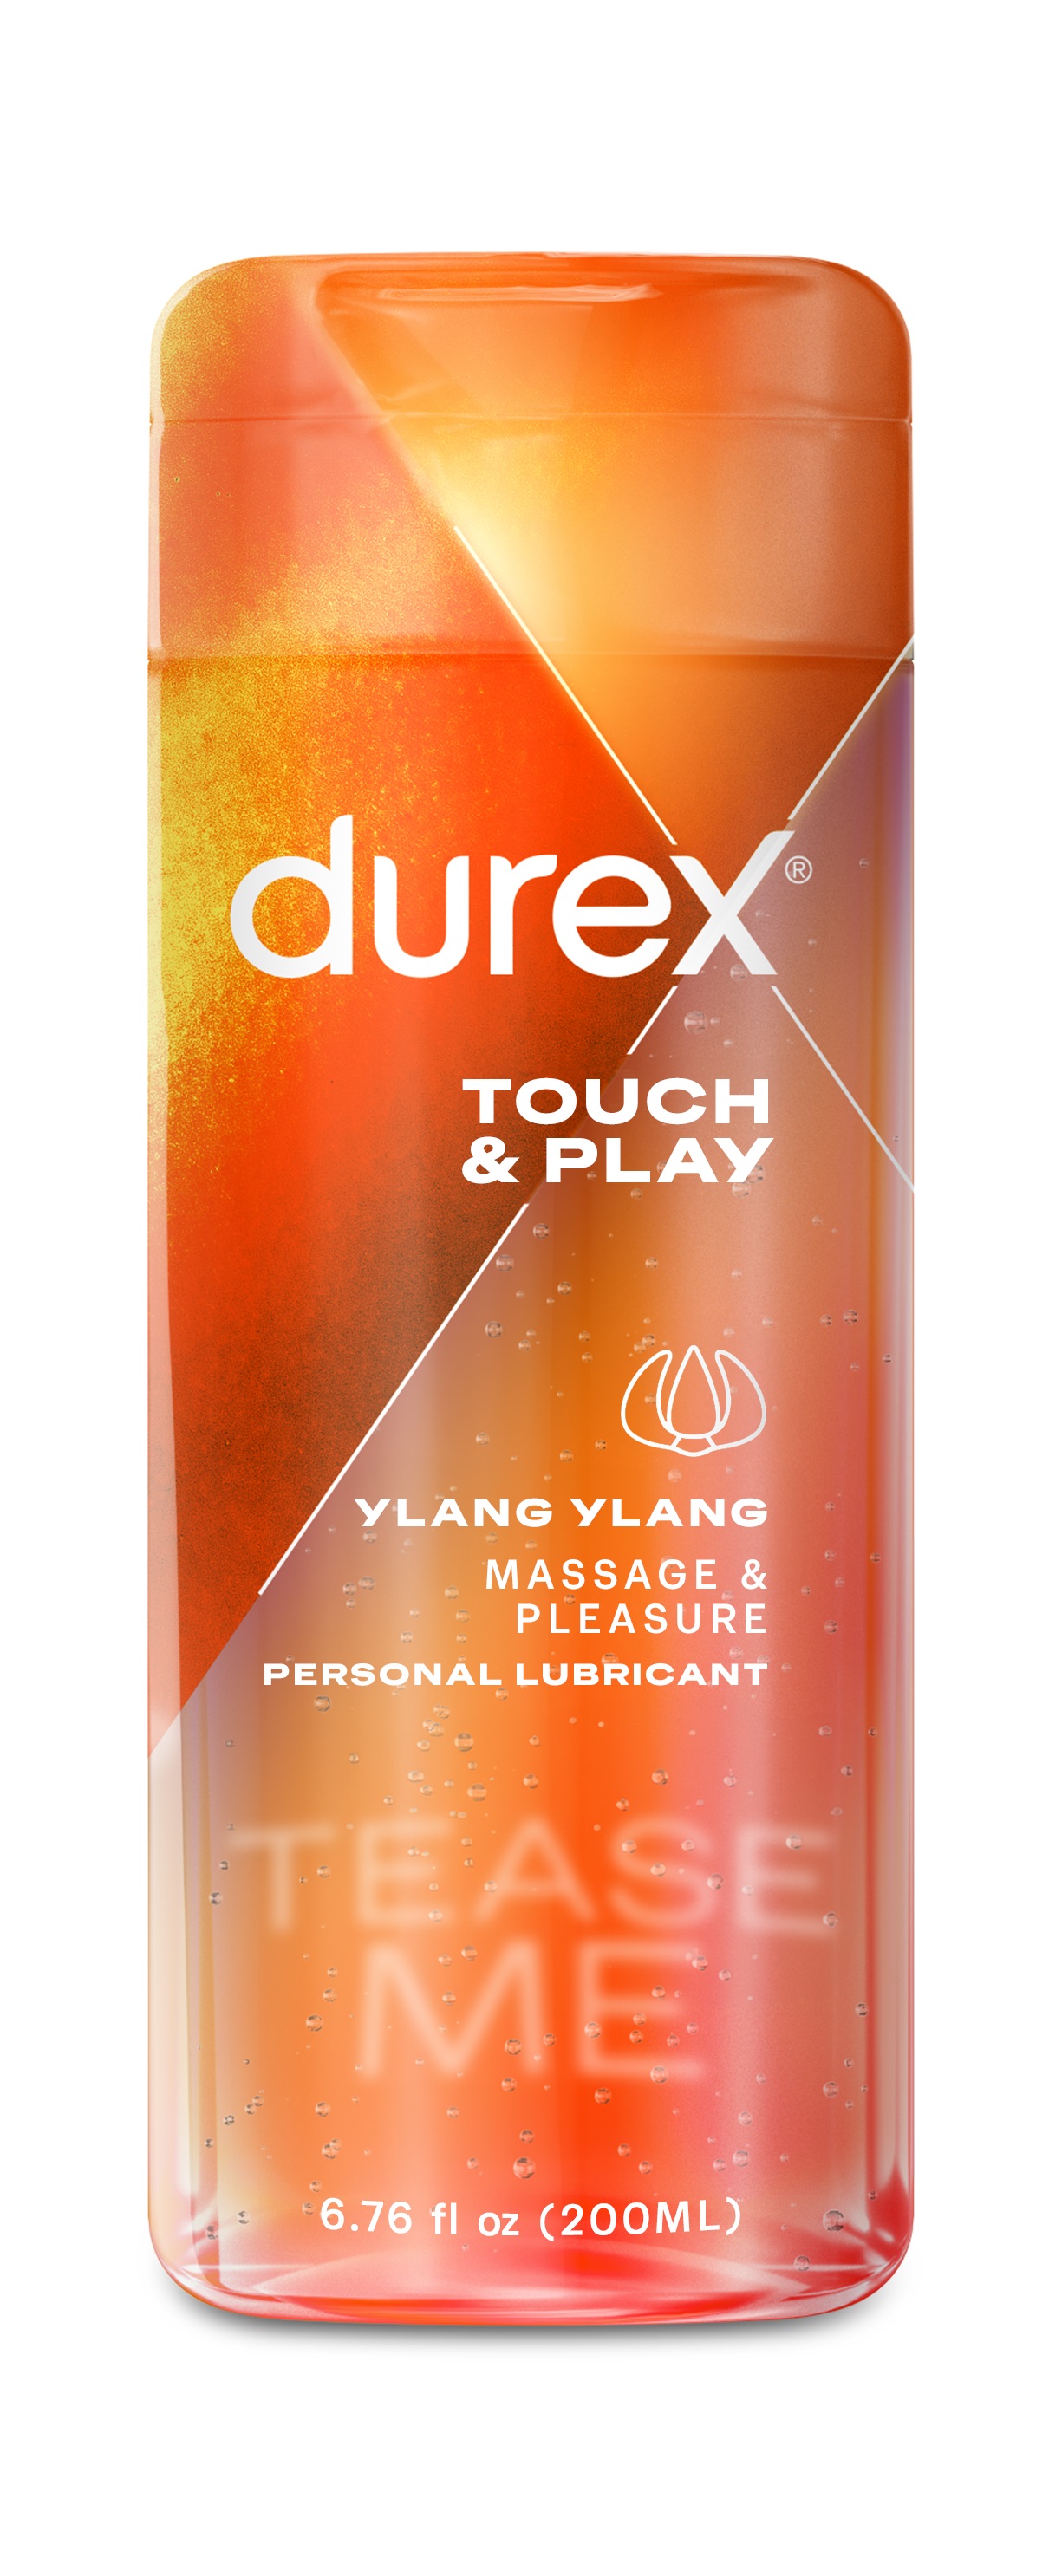 Durex® Touch & Play Ylang Ylang Personal Lubricant